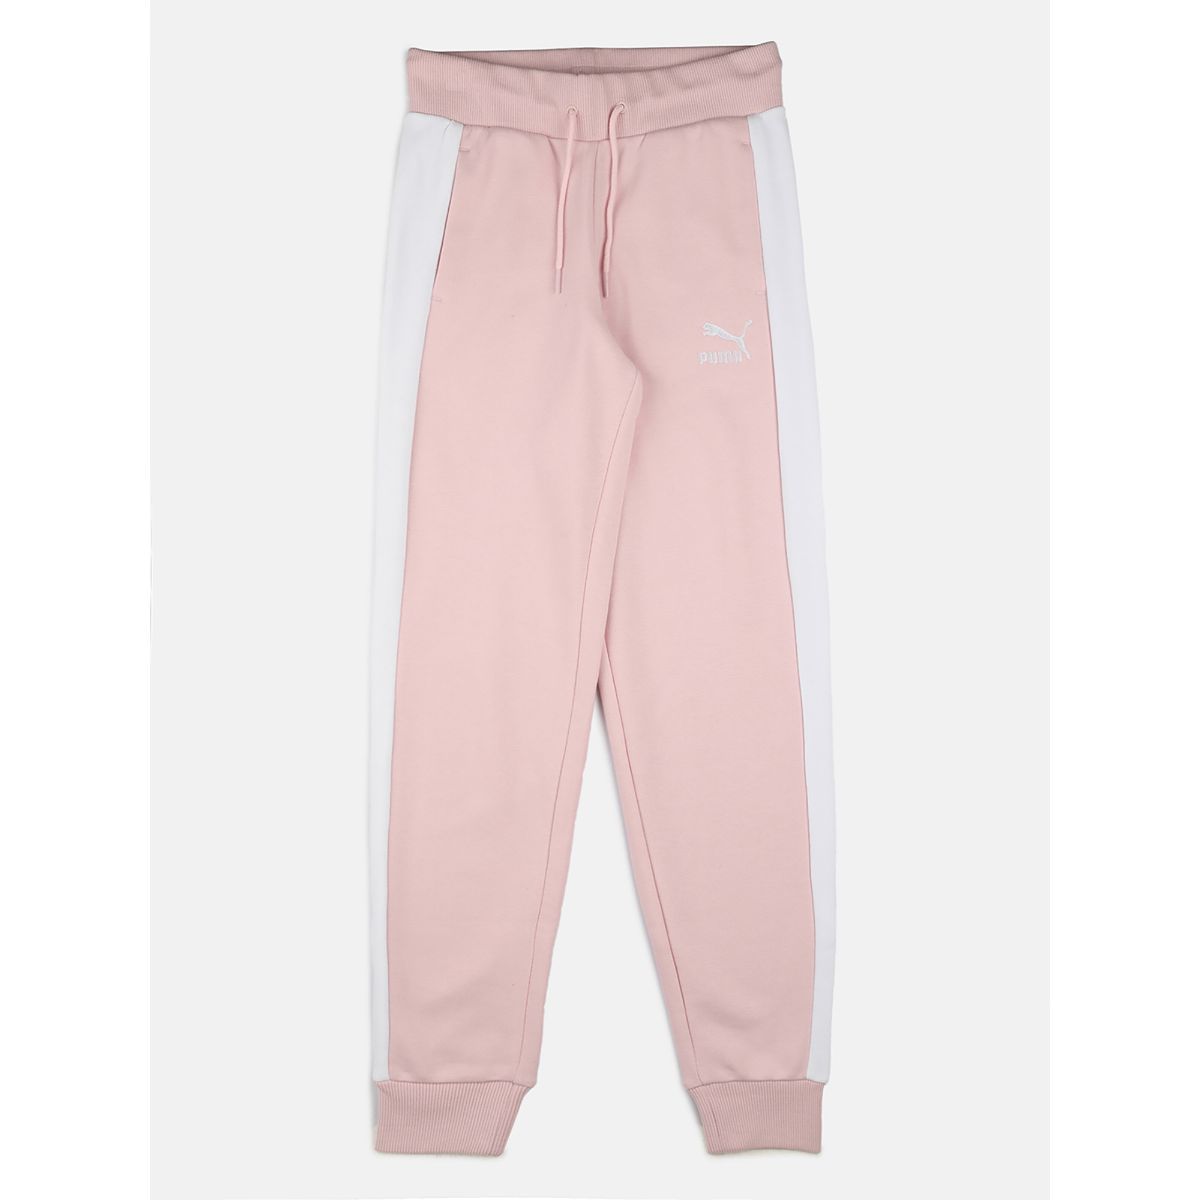 Buy PUMA Trousers online  Men  510 products  FASHIOLAin